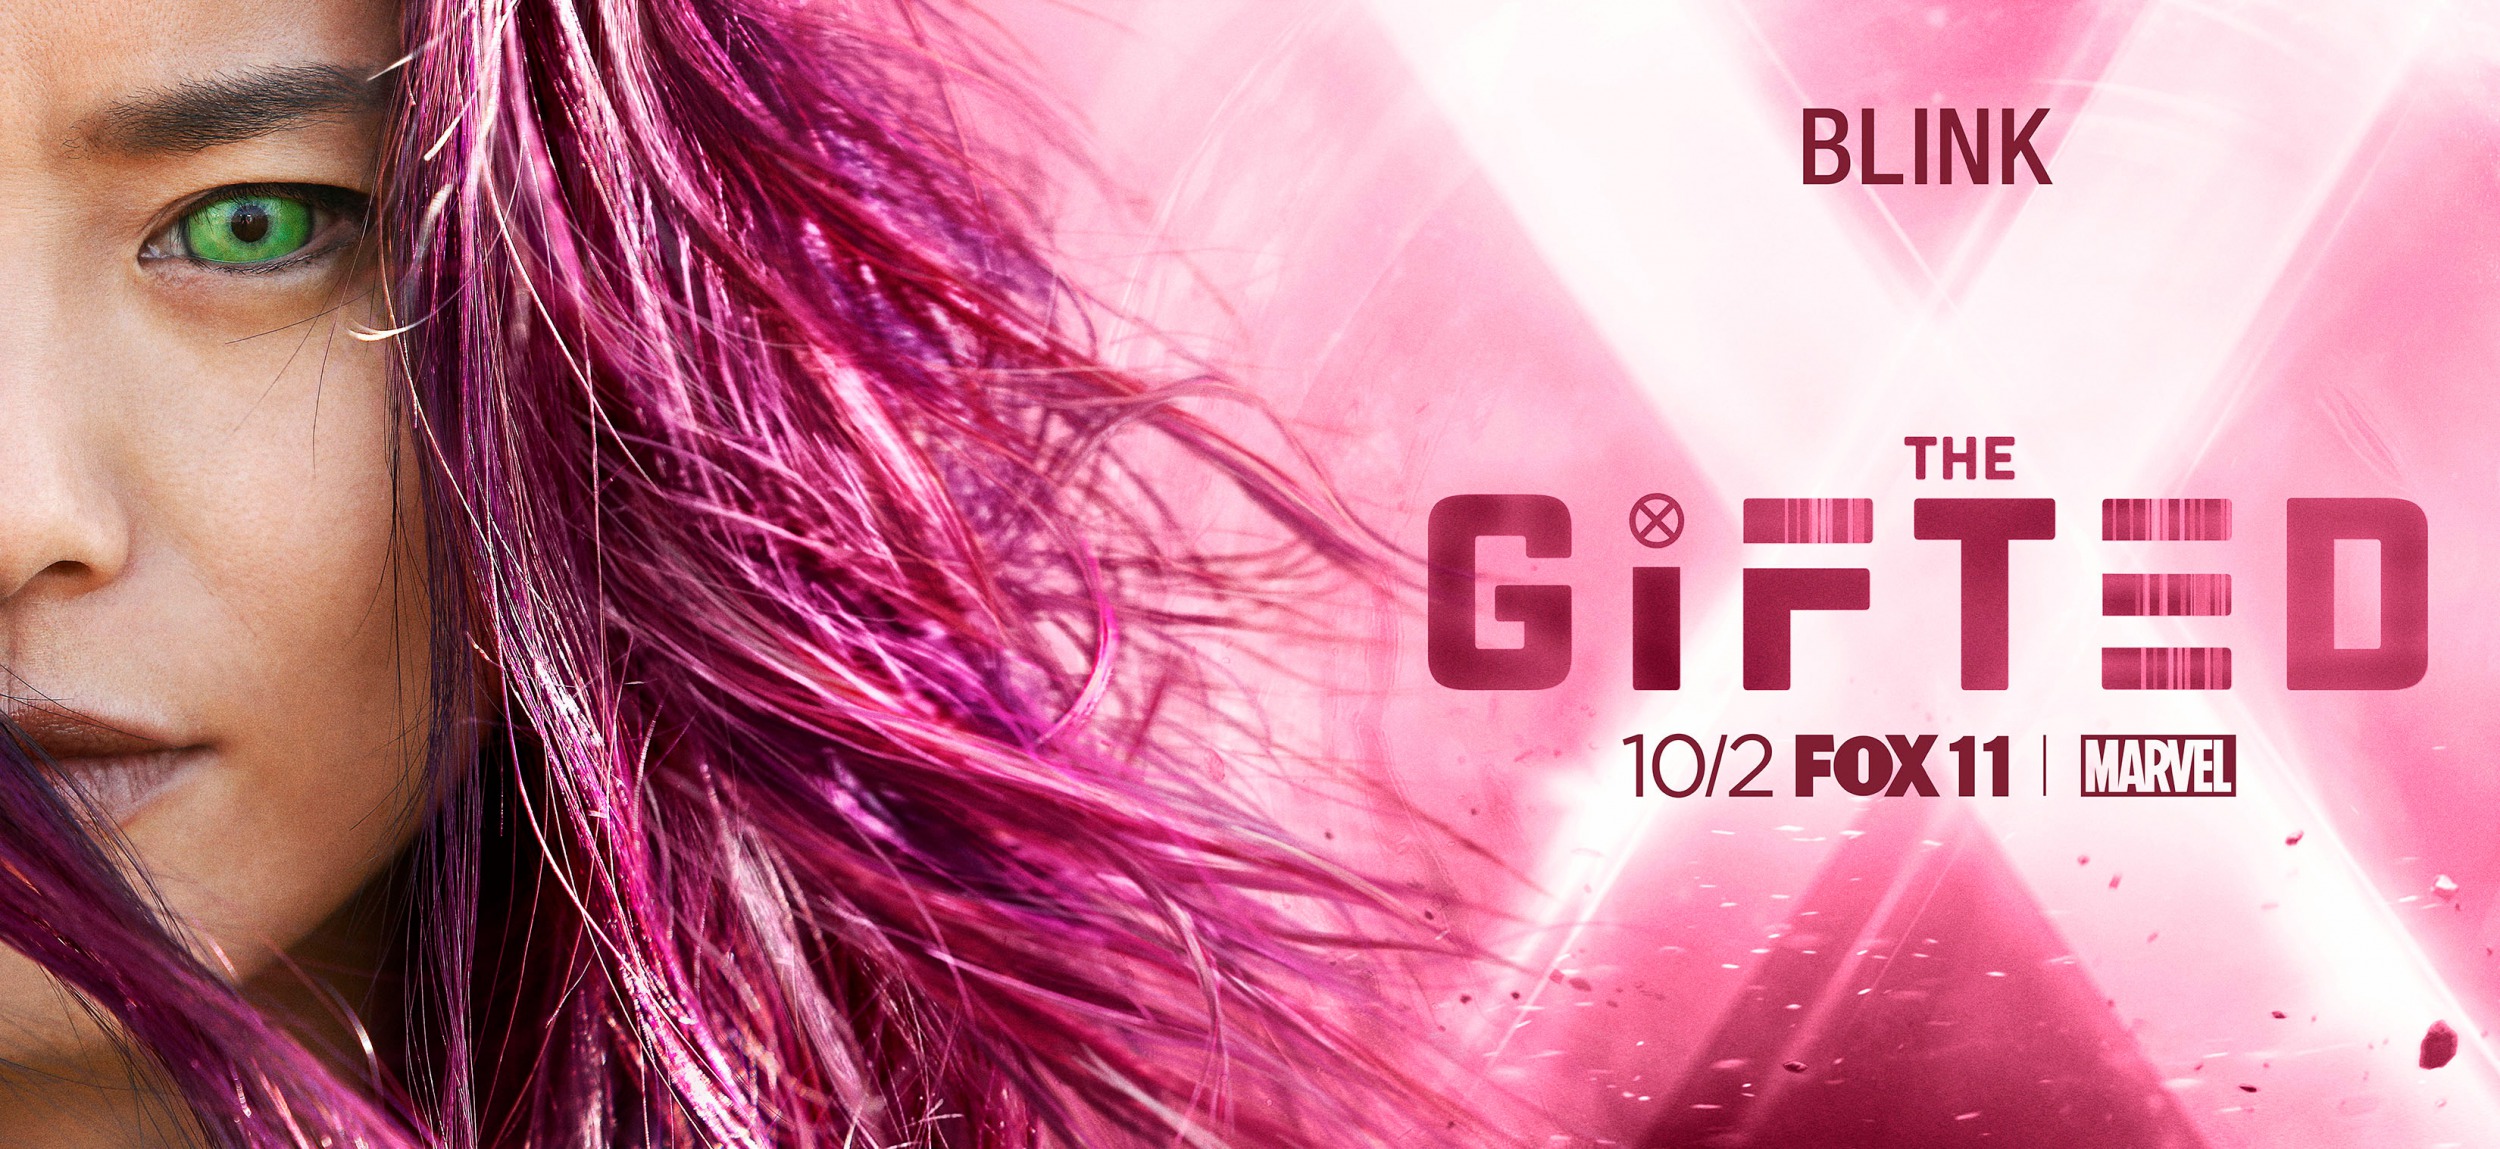 Mega Sized TV Poster Image for The Gifted (#3 of 13)